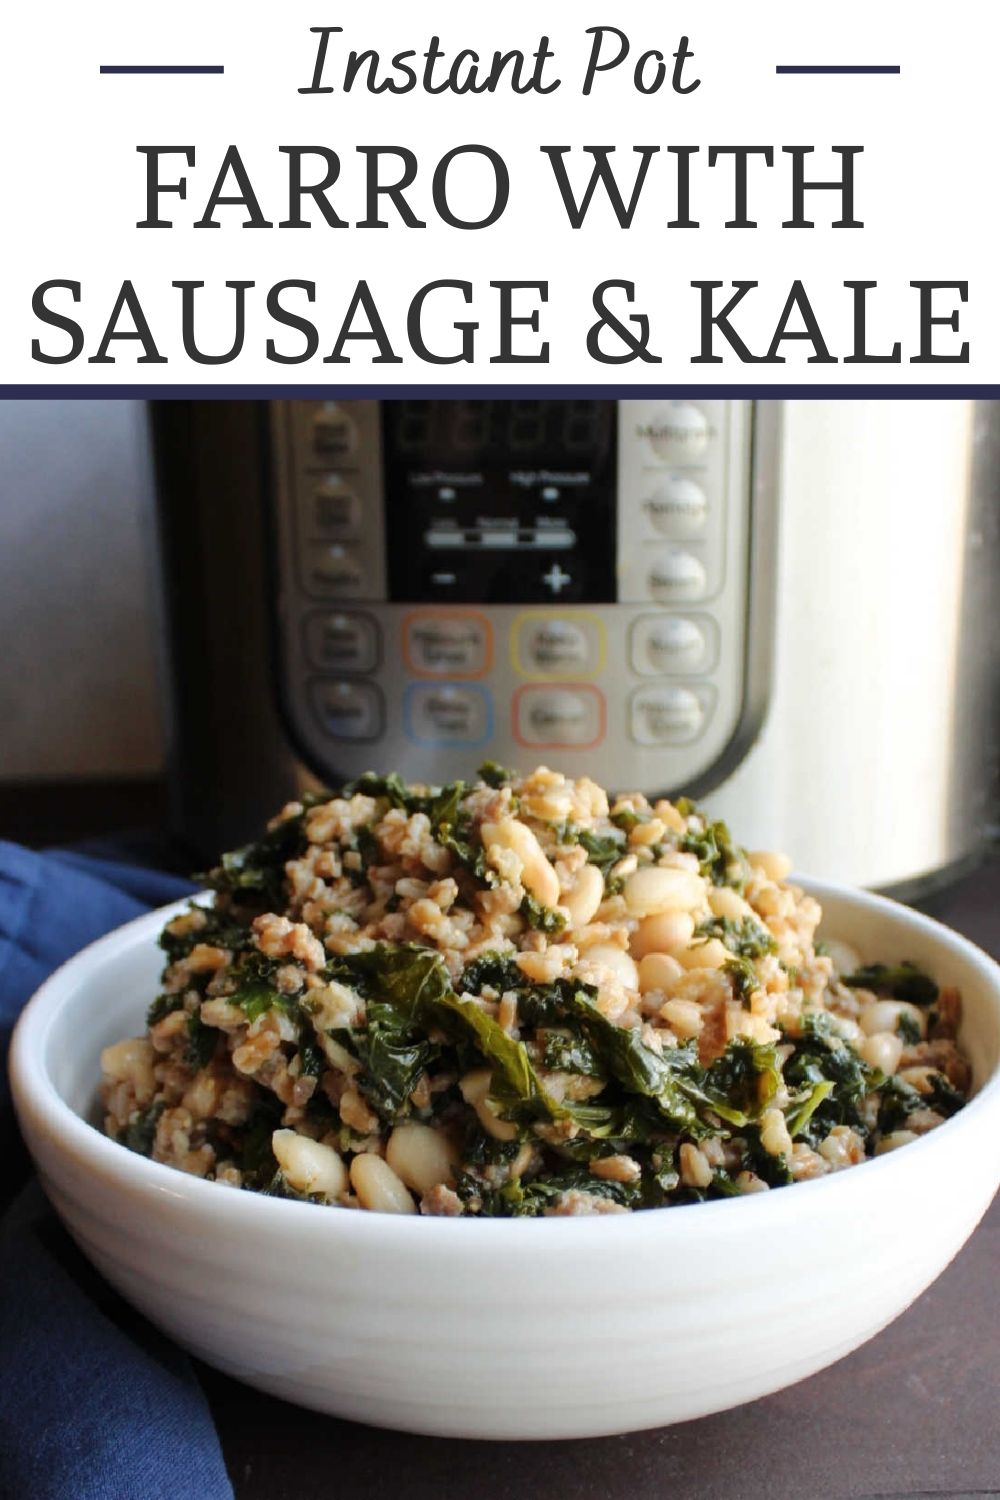 This all in one meal combines the nutritional powerhouses of farro and kale with the tasty goodness of Italian sausage and Parmesan cheese. It is a well rounded meal that comes together quick and easily with the help of an instant pot.